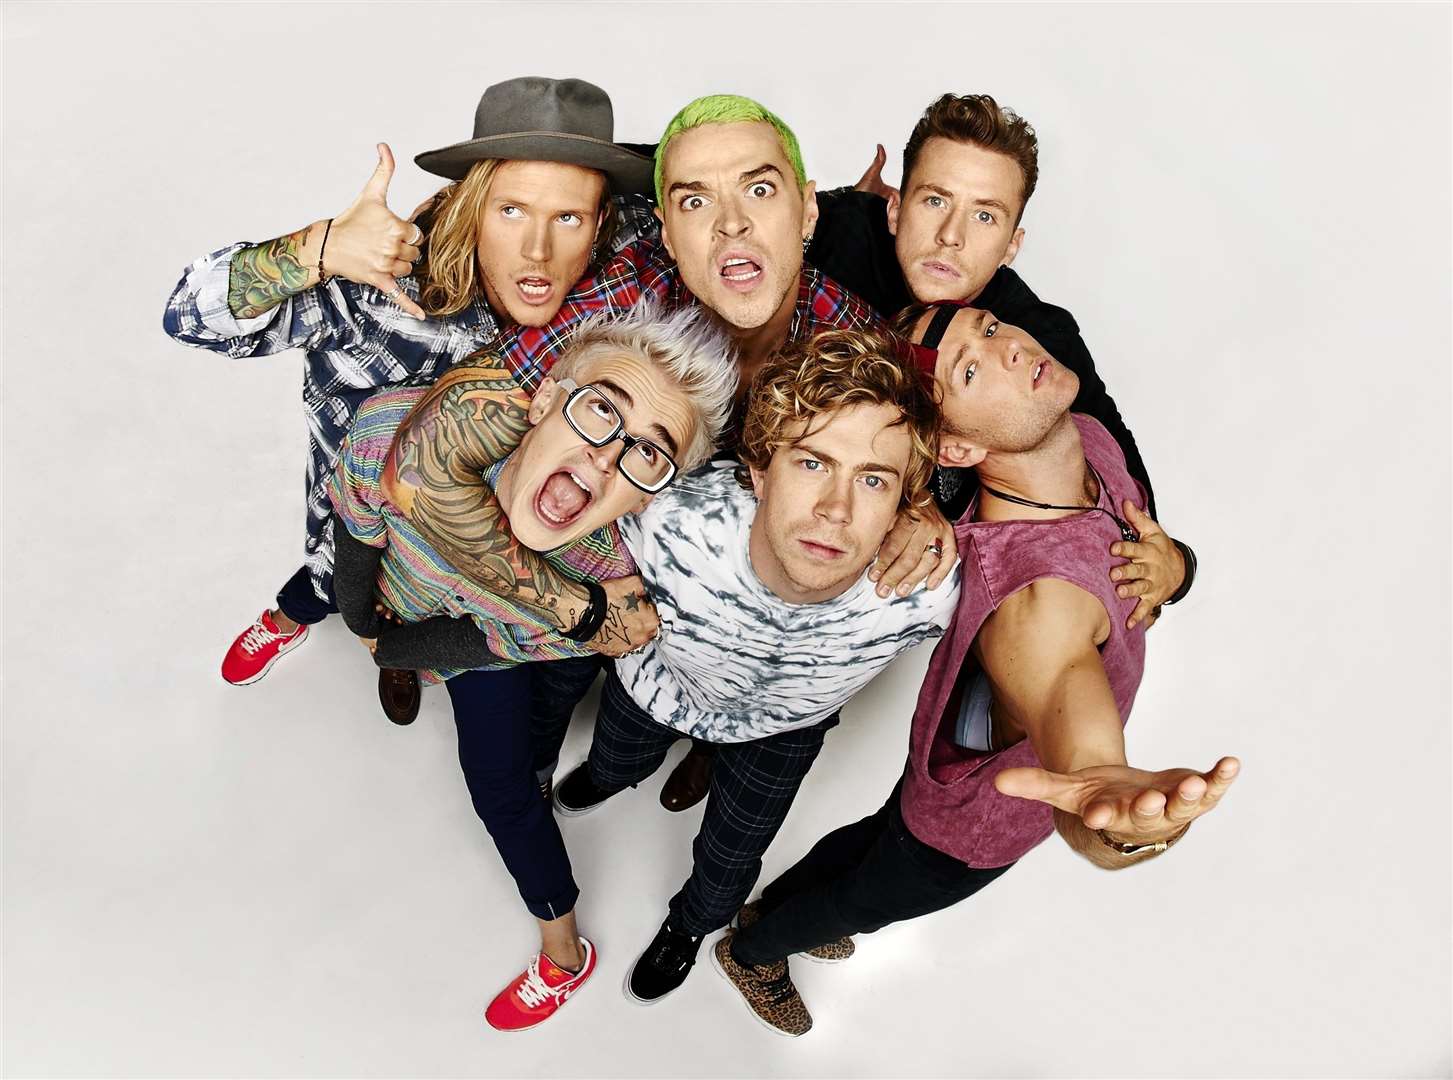 McFly joined forces with Busted in November 2013 to form McBusted